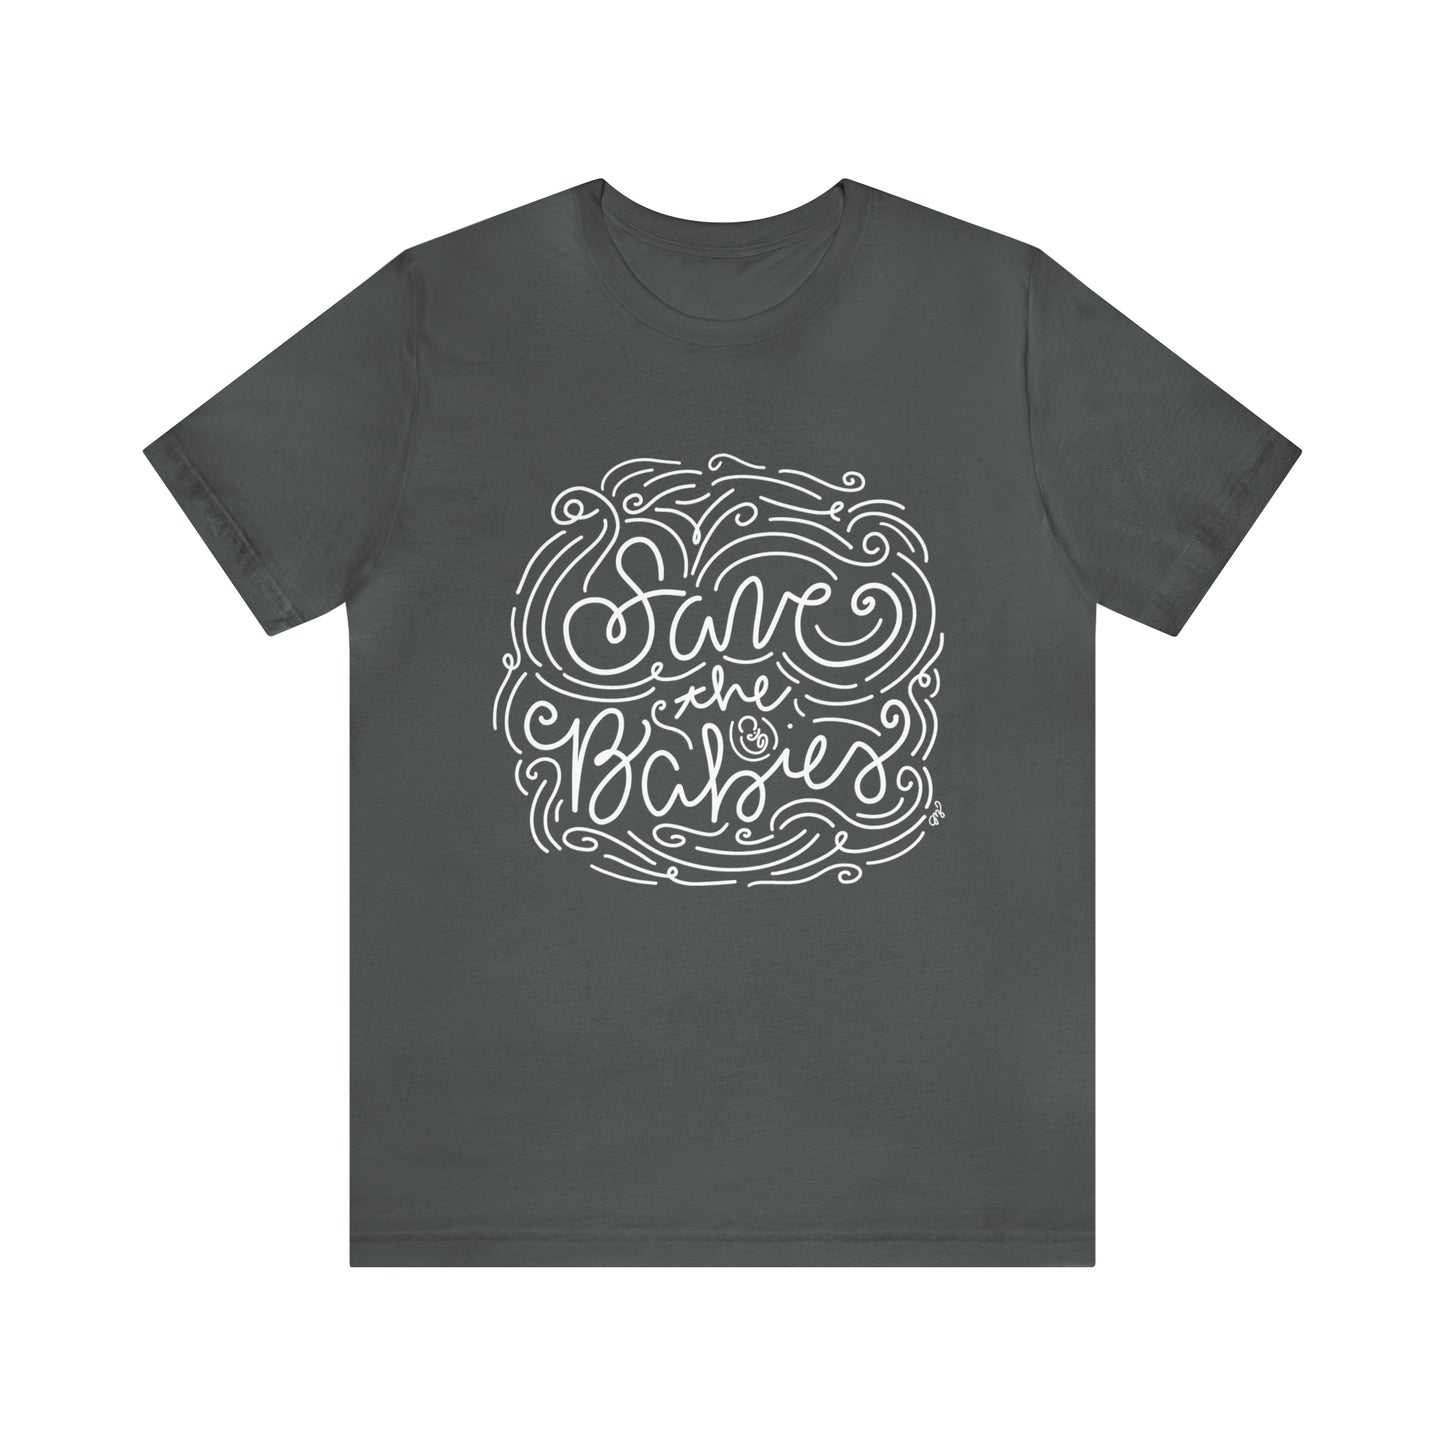 Save the Babies T-shirt | Donation to Piedmont Women's Center